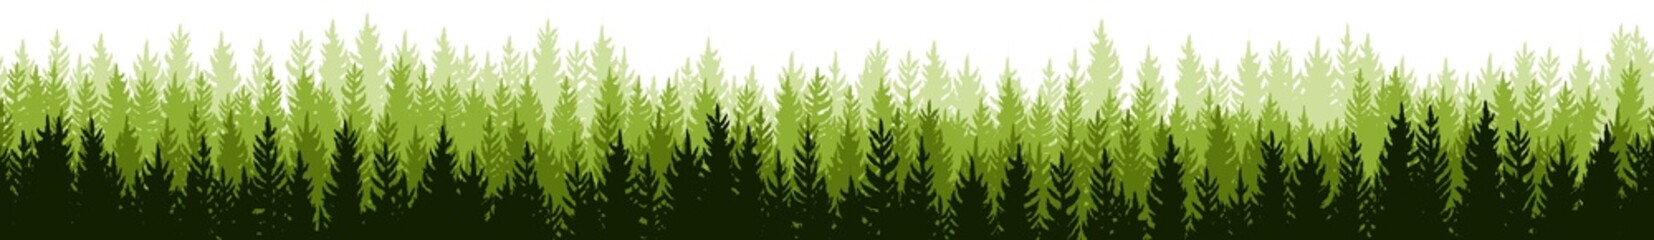 Pine forest. Silhouettes of coniferous trees. Wild landscape horizontally. Nice panoramic view. Seamless illustration isolated on white background. vector